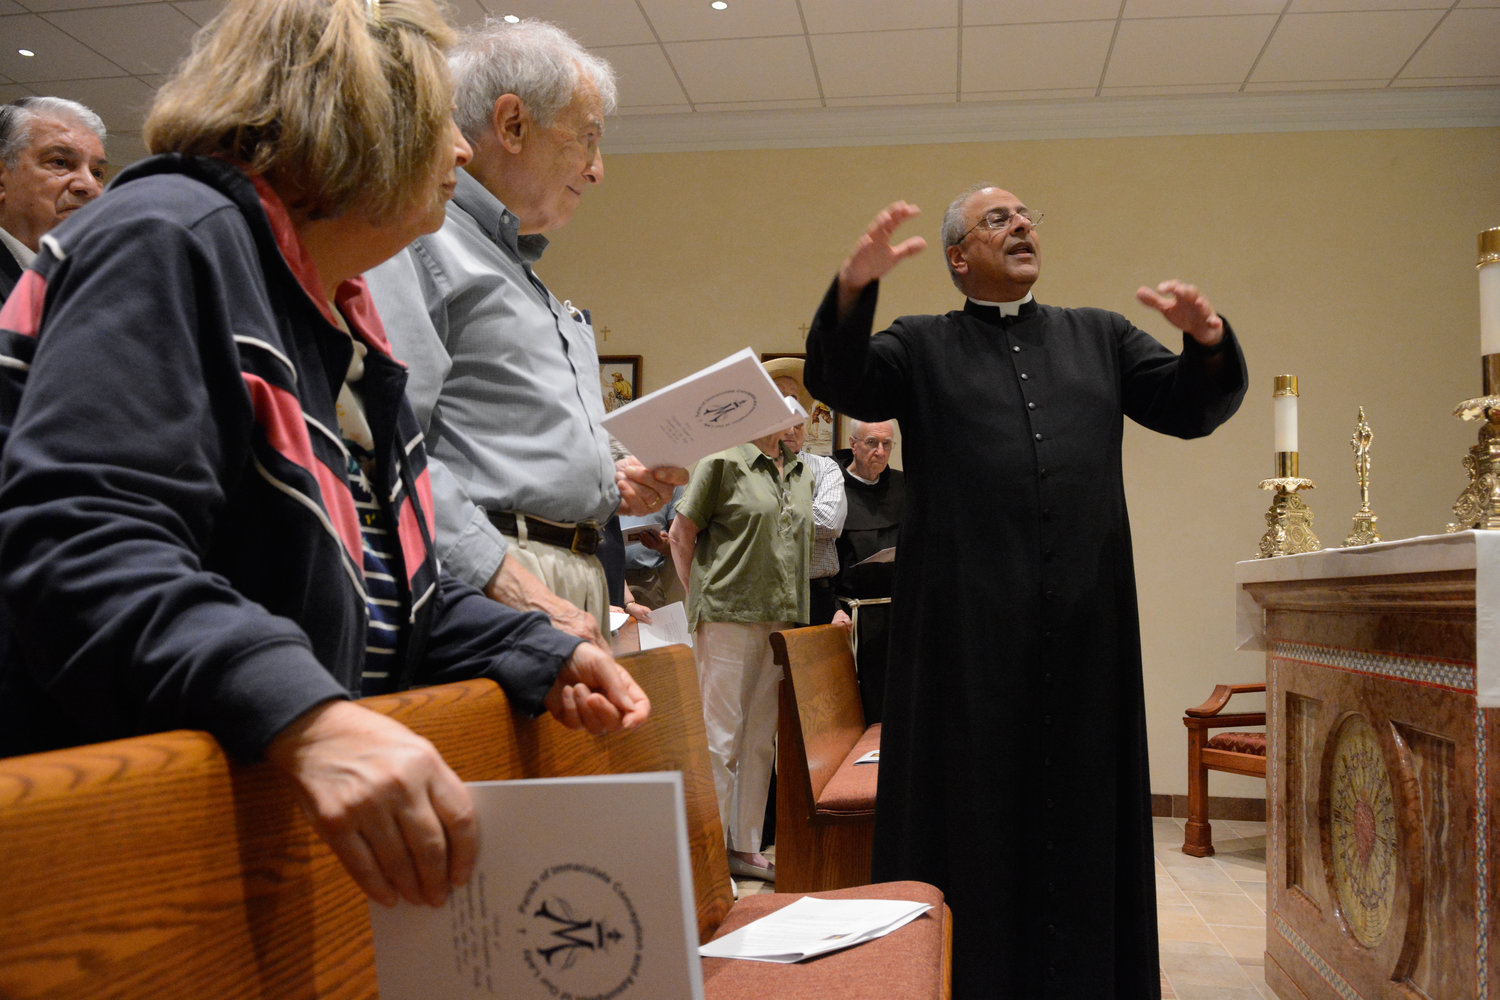 Father Anthony Sorgie, the pastor, and parishioners join in the chapel blessing.